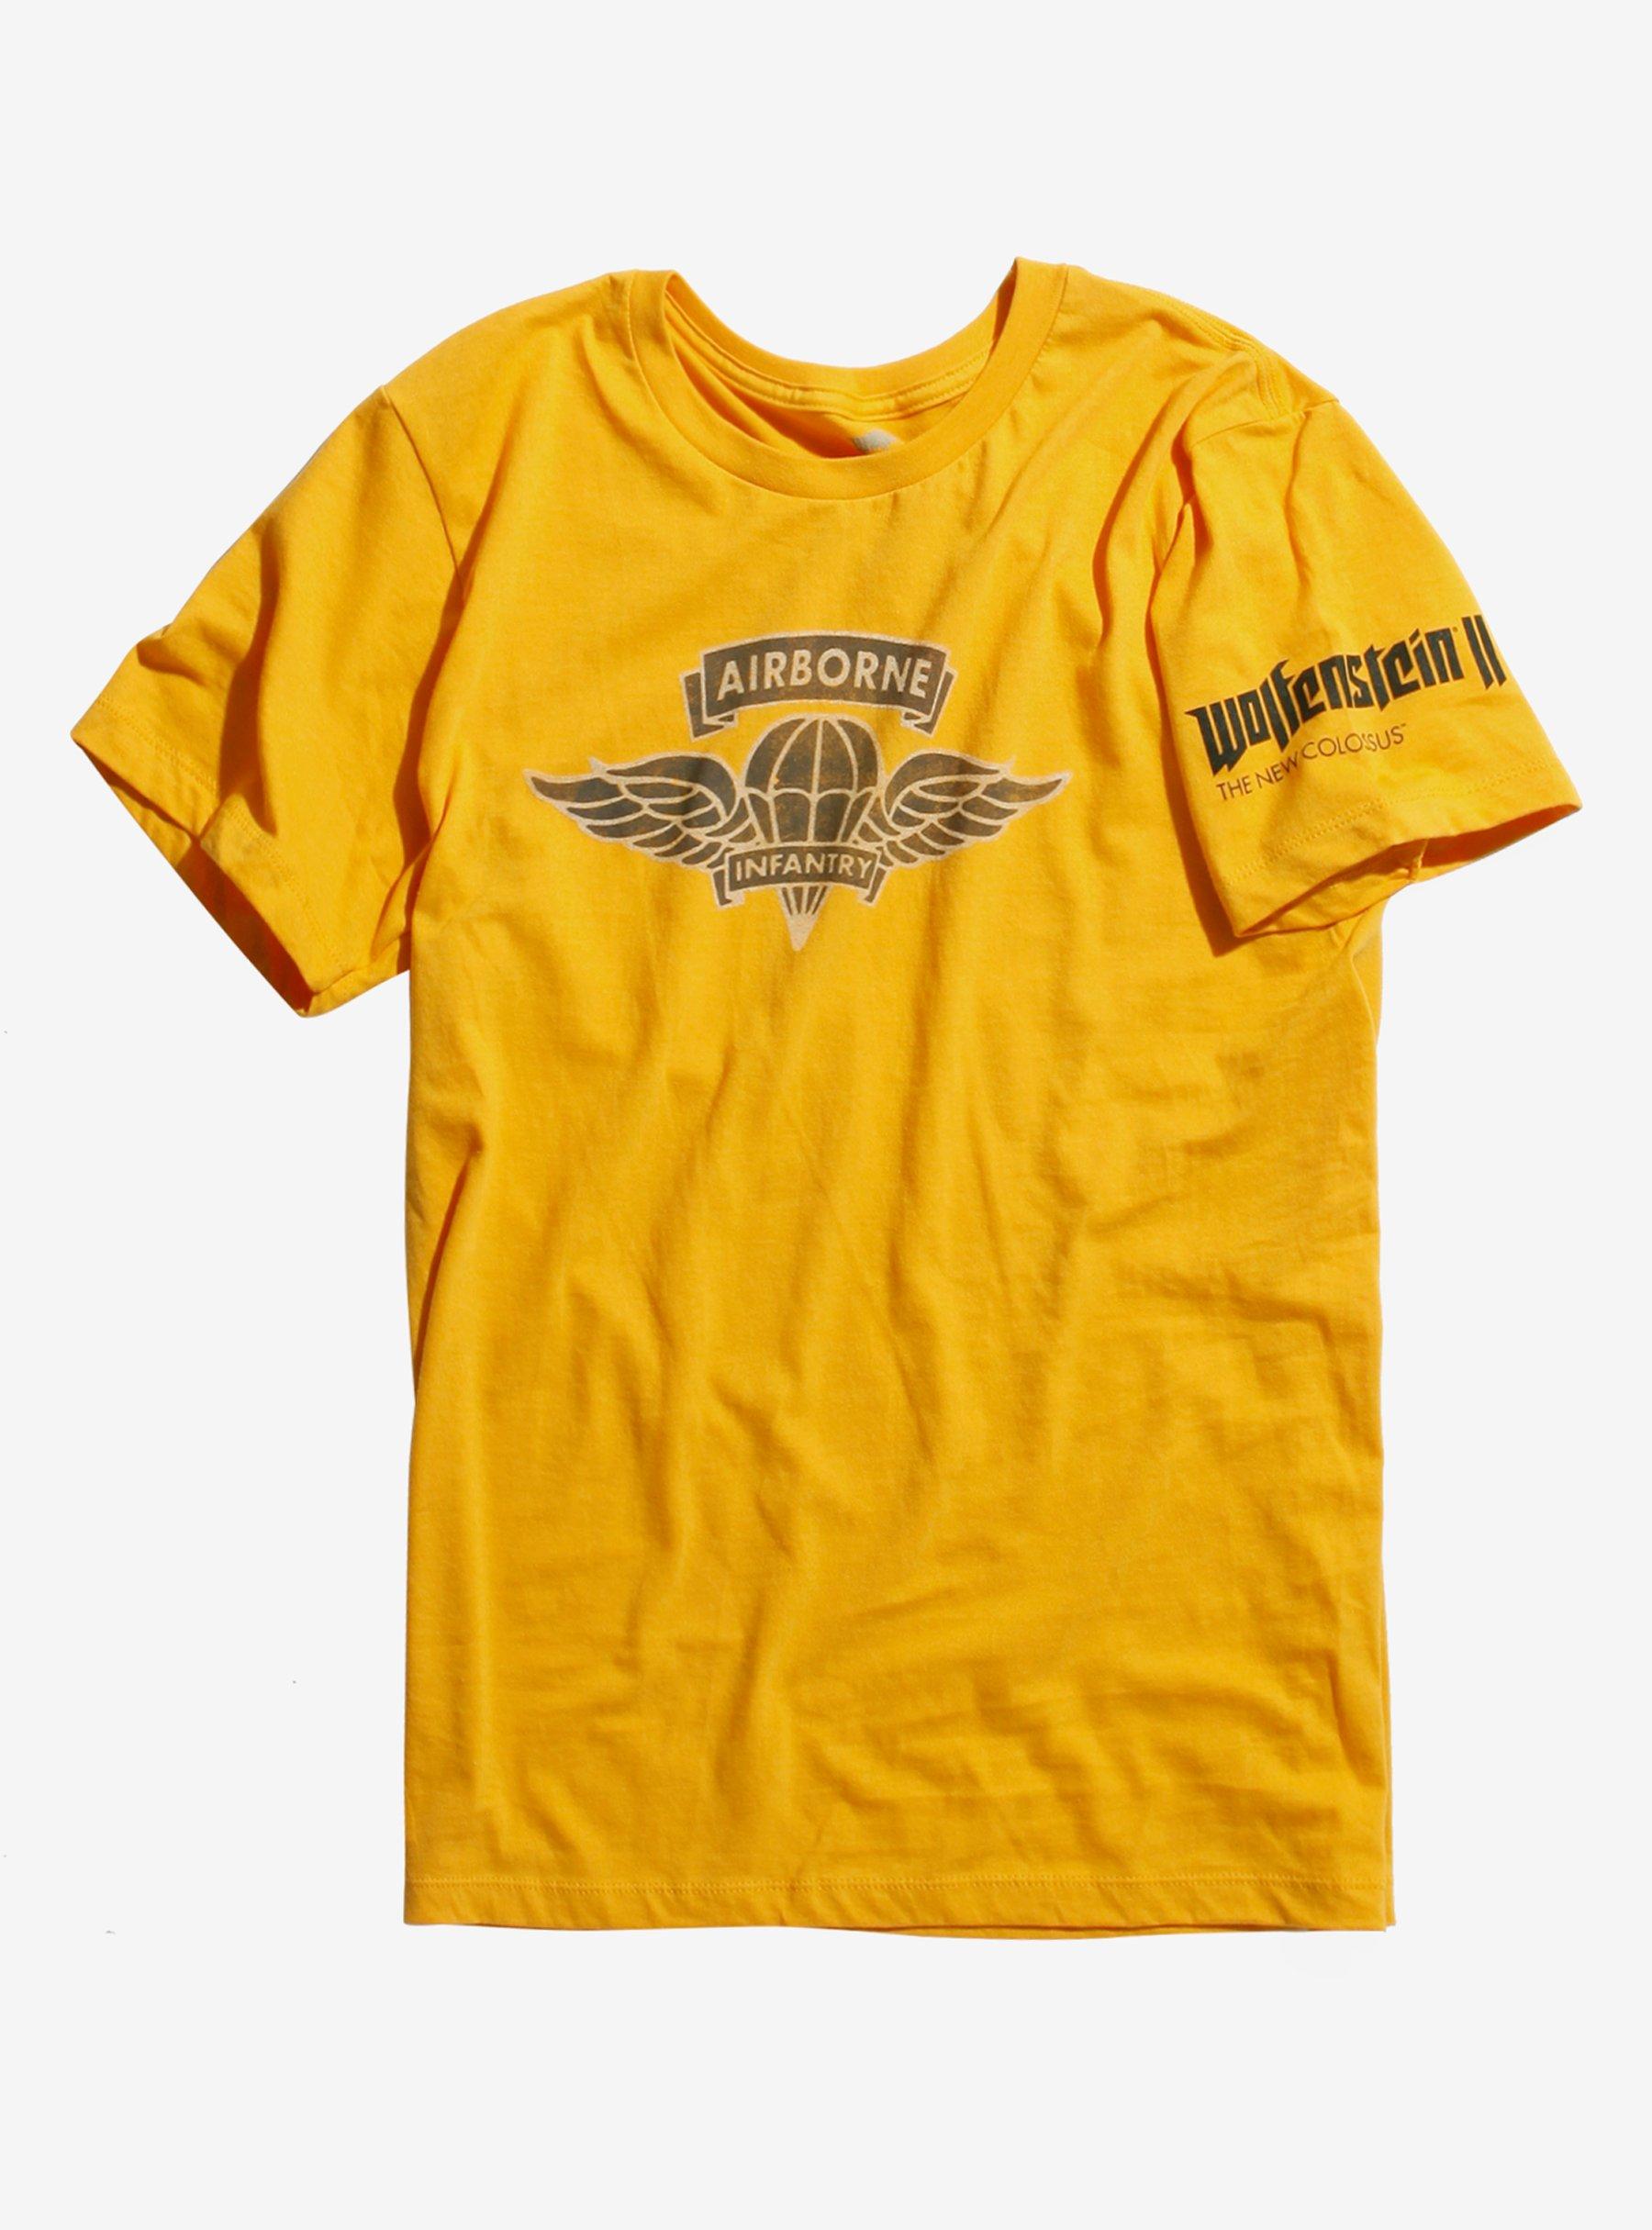 Wolfenstein II: The New Colossus Airborne Infantry T-Shirt, YELLOW, hi-res